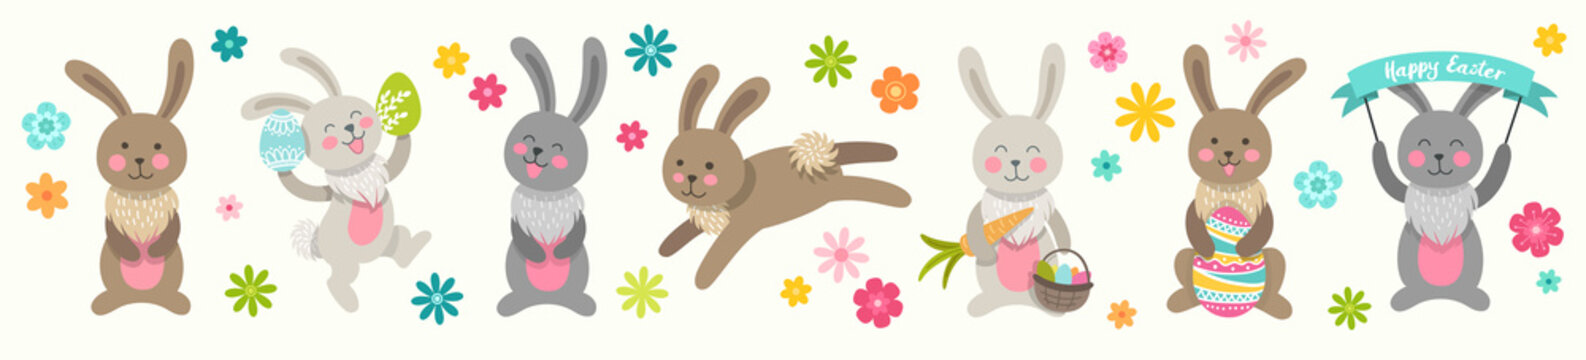 Set of cute Easter cartoon characters rabbits and design elements flowers. Easter bunny and flowers. Vector illustration